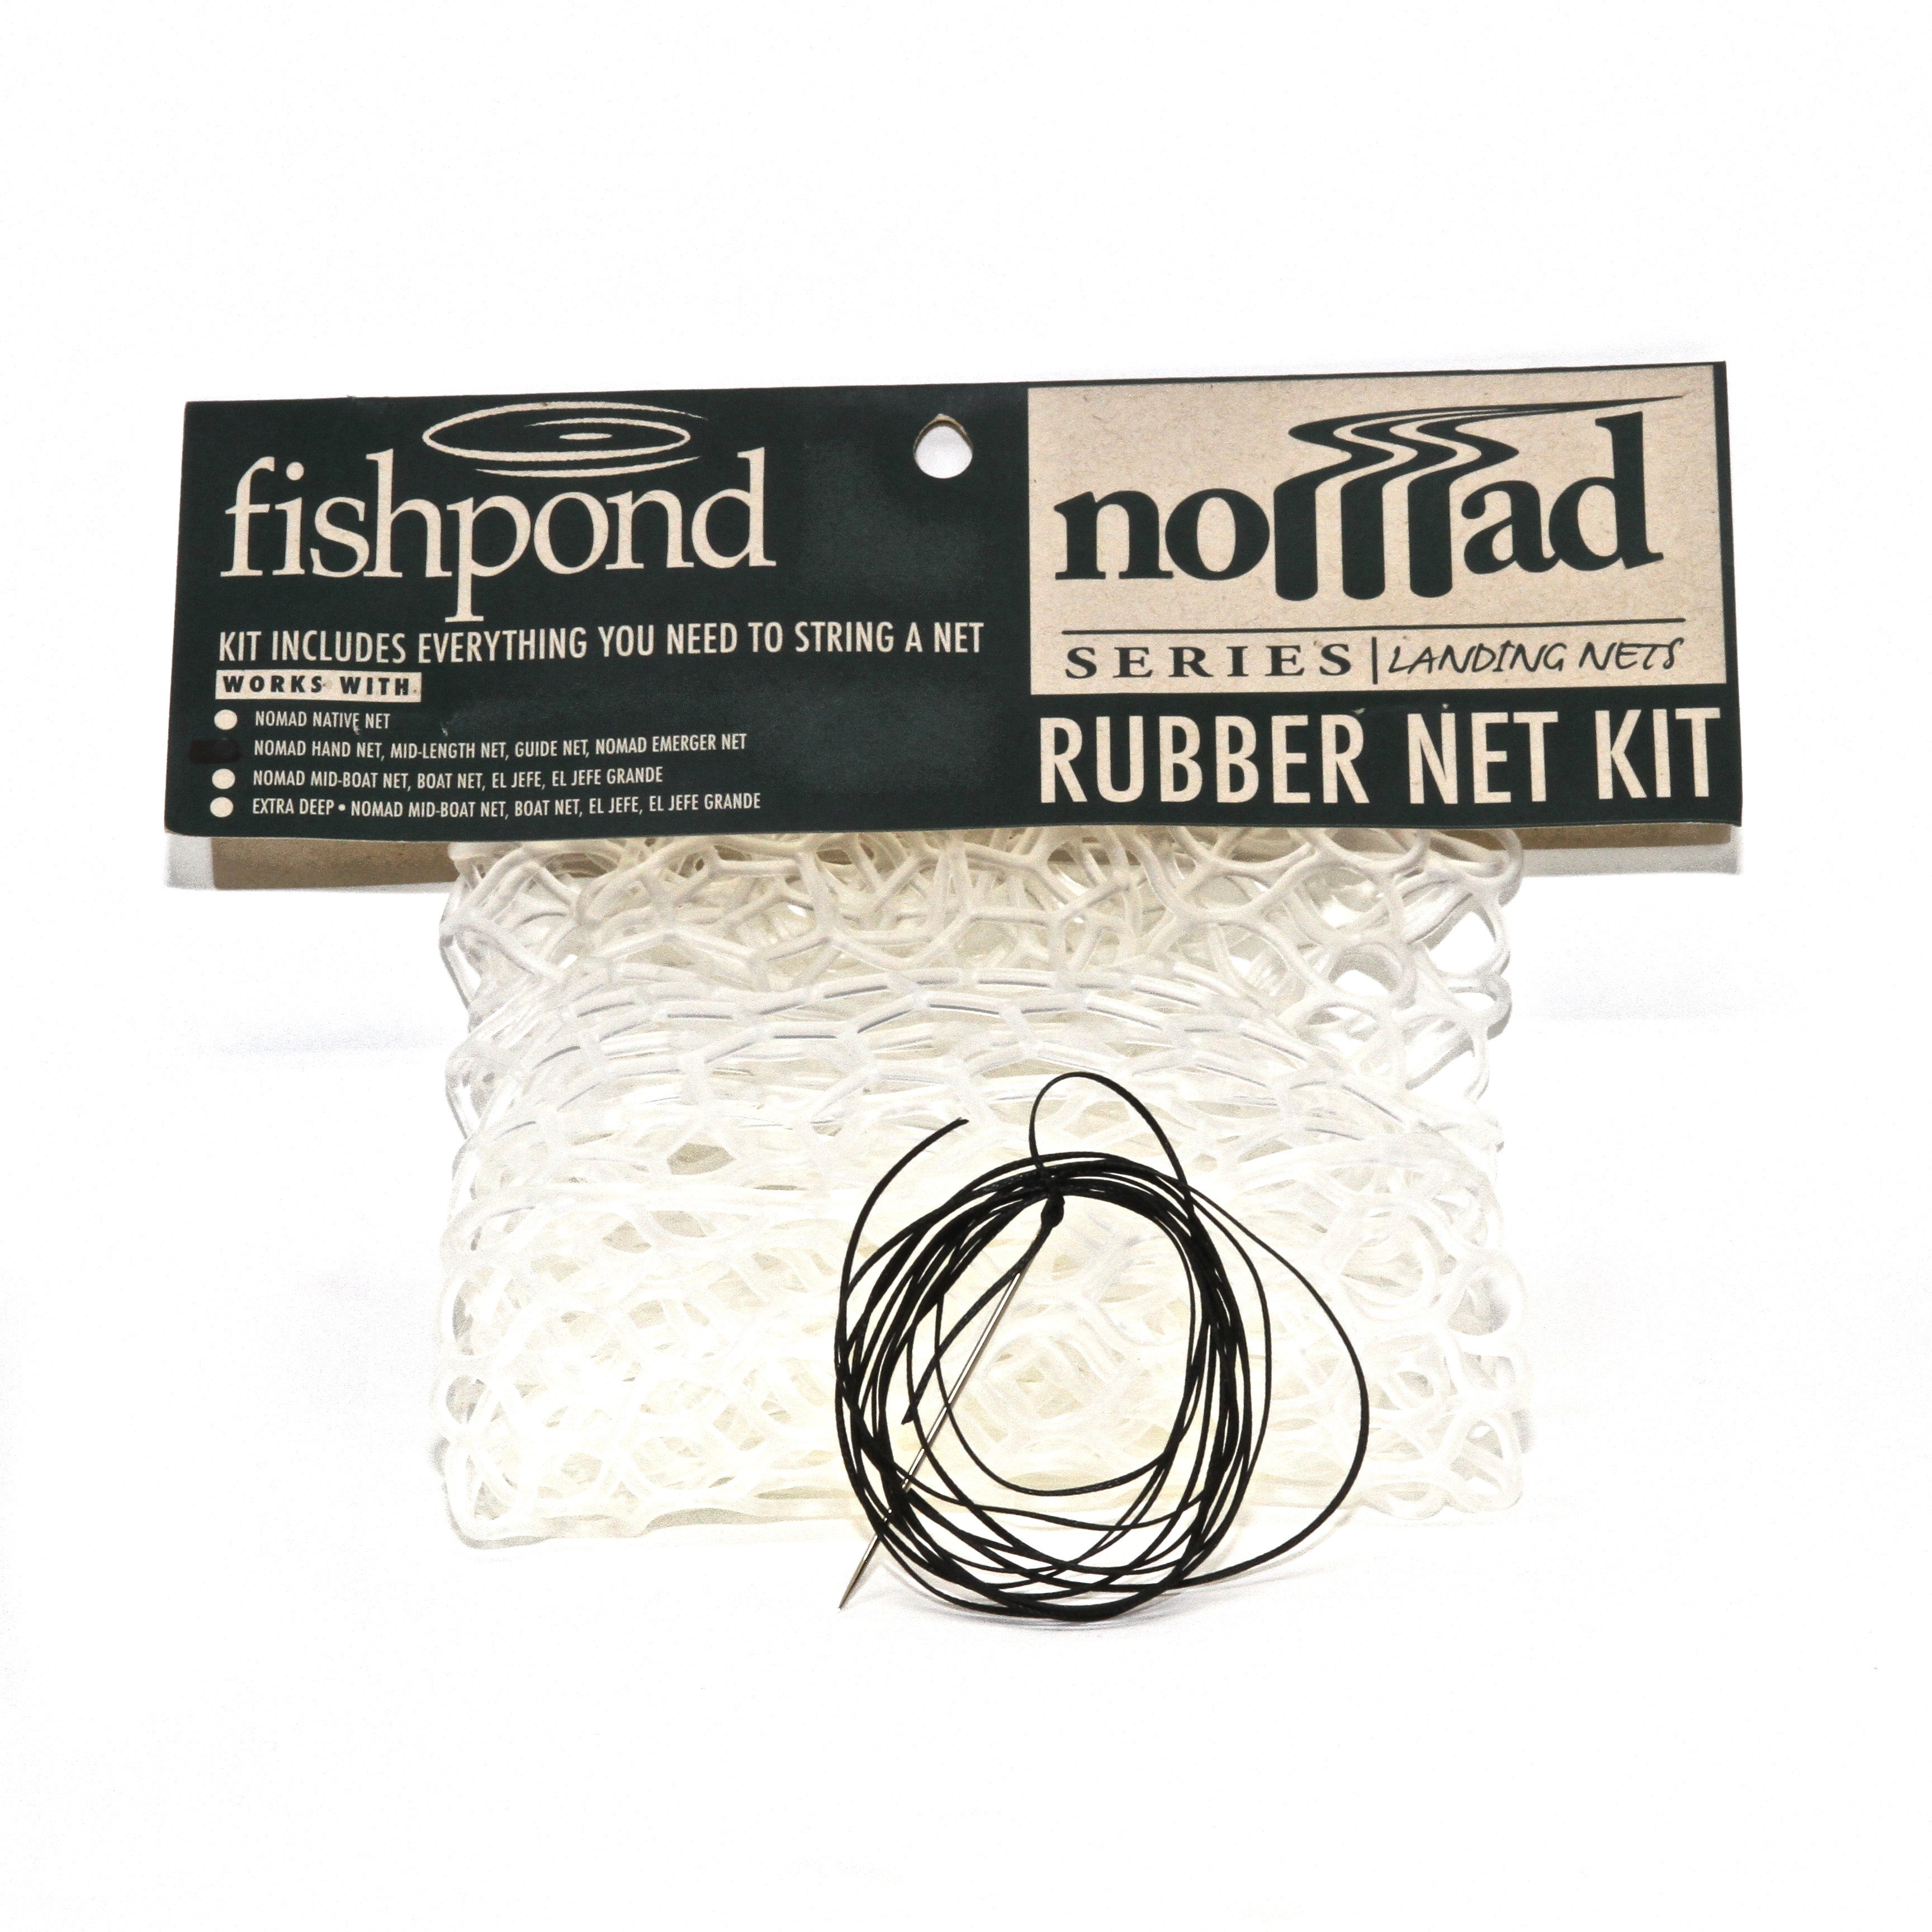 Fishpond Nomad Rubber Replacement Net Kits